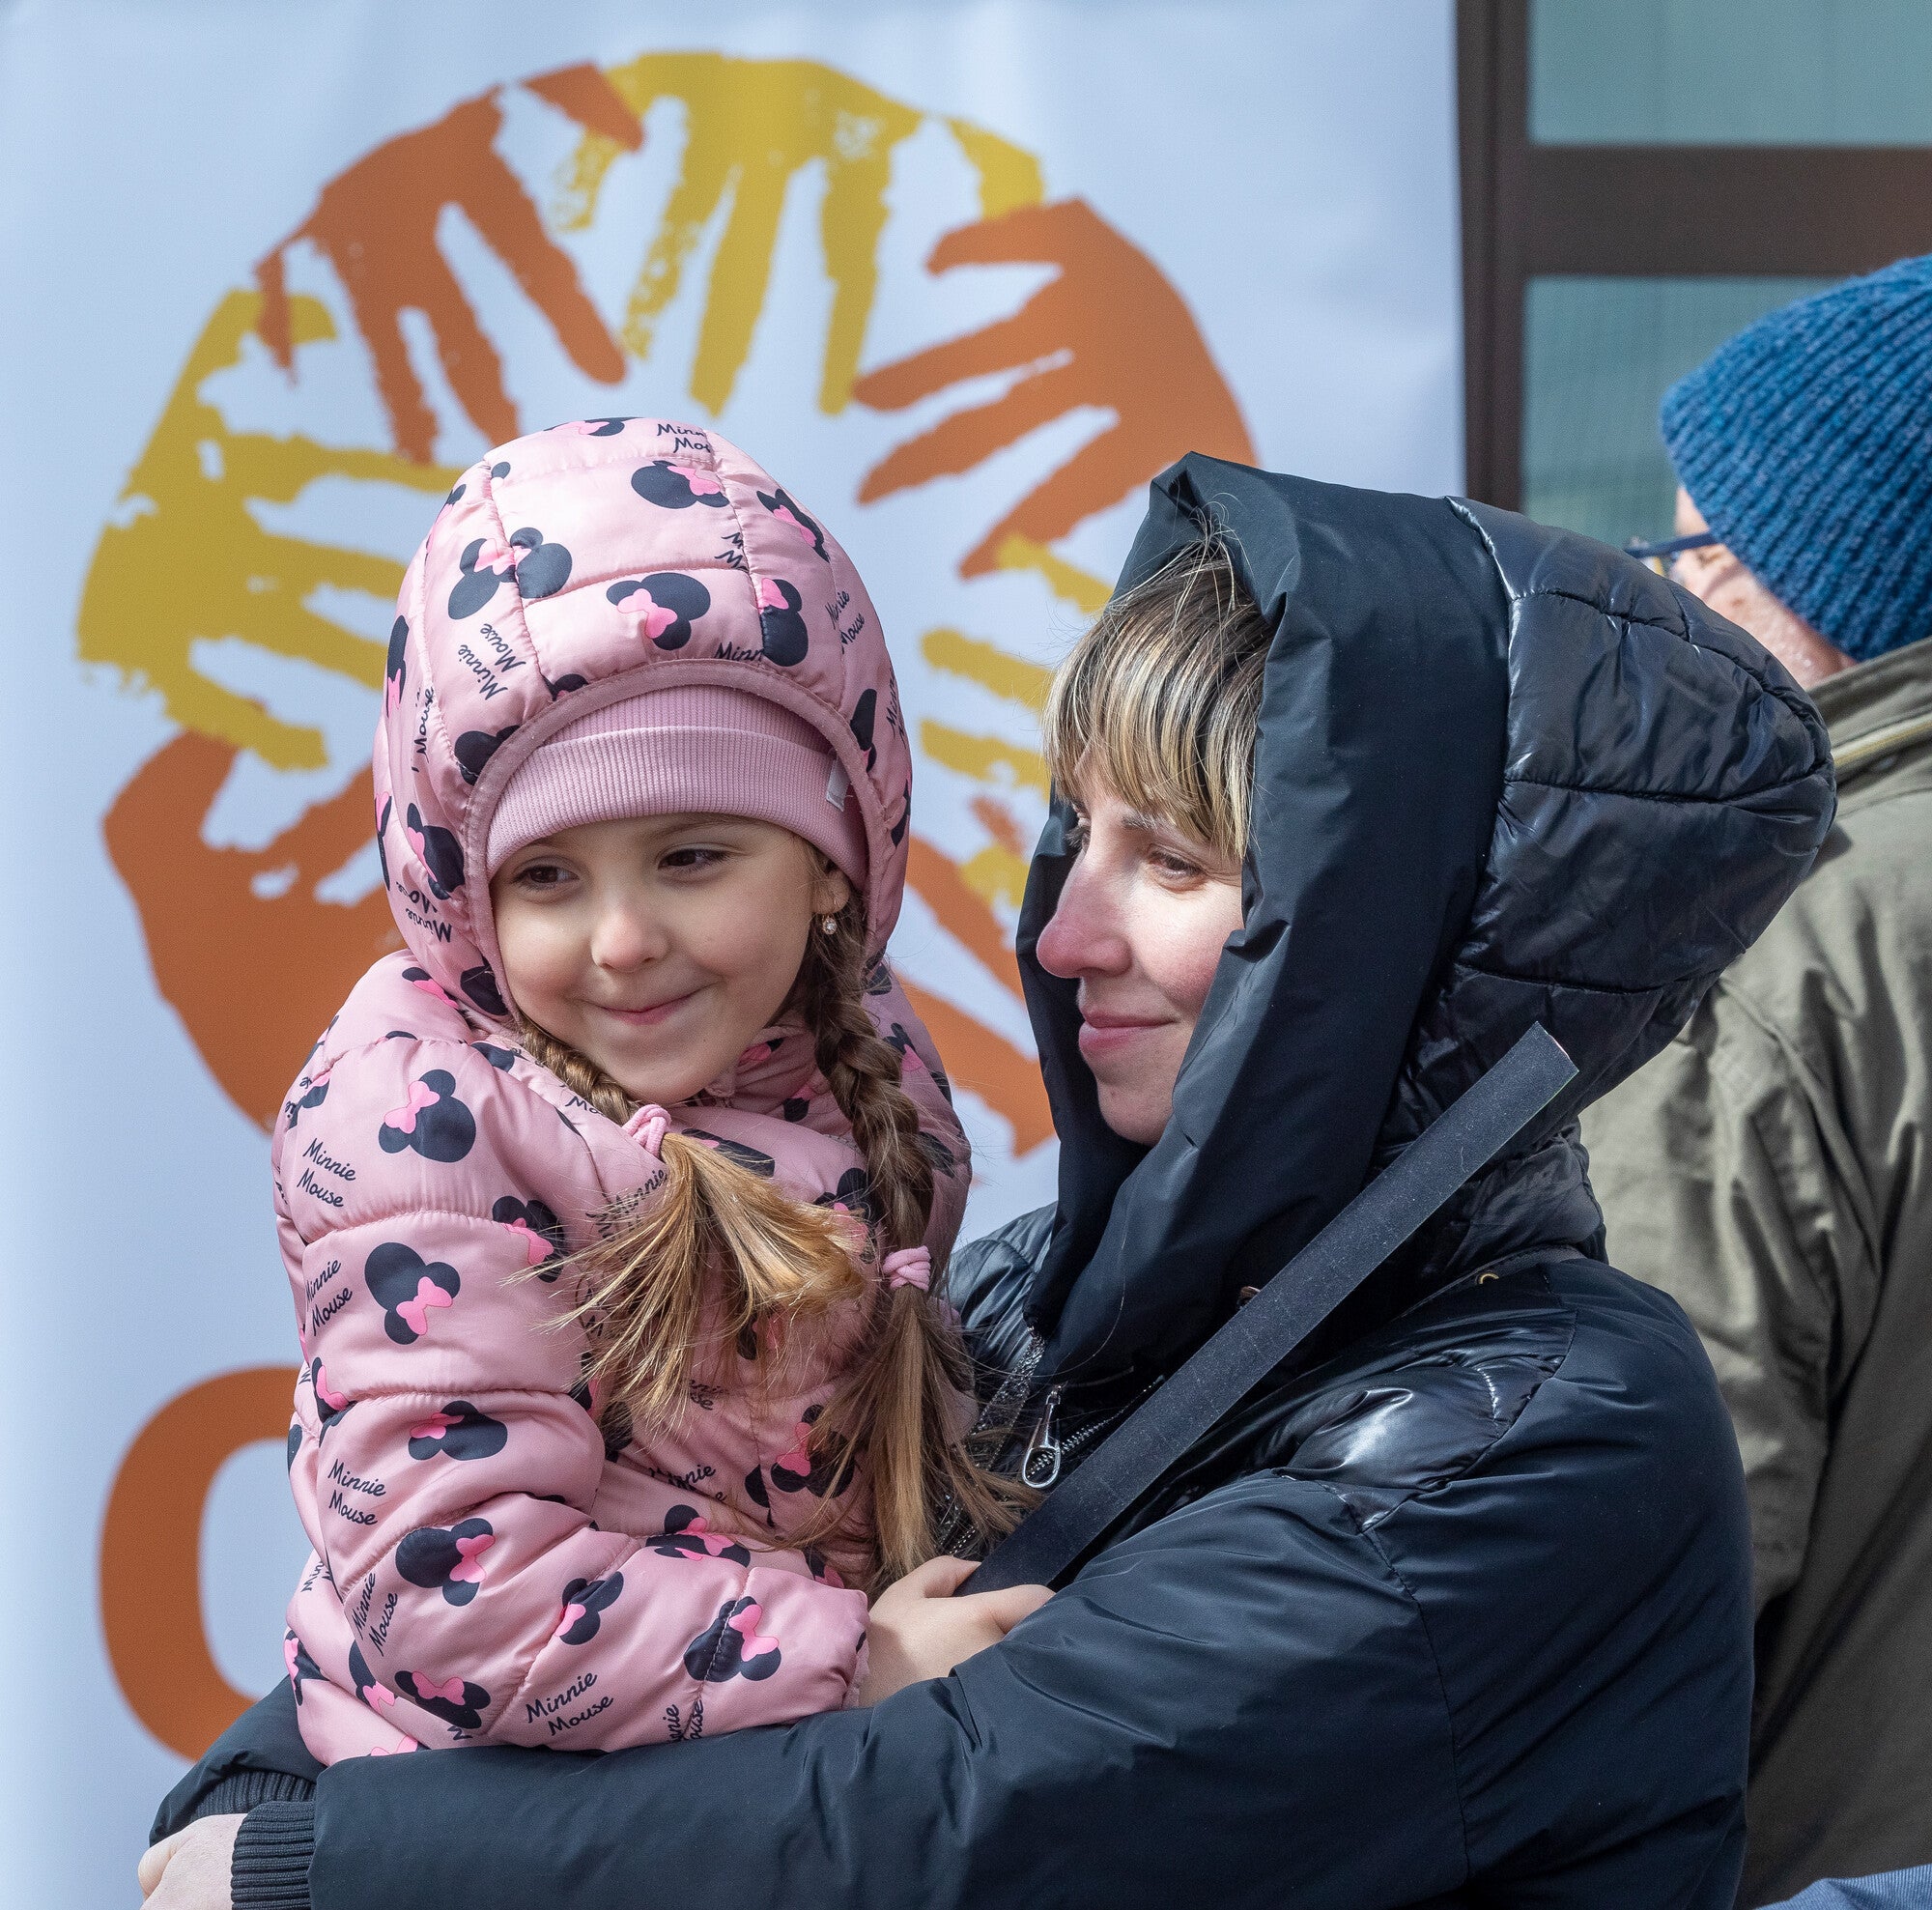 Ukrainian refugee Marina embraces her daughter, Arina, moments after passing through border control into Poland near the town of Hrebrenne.